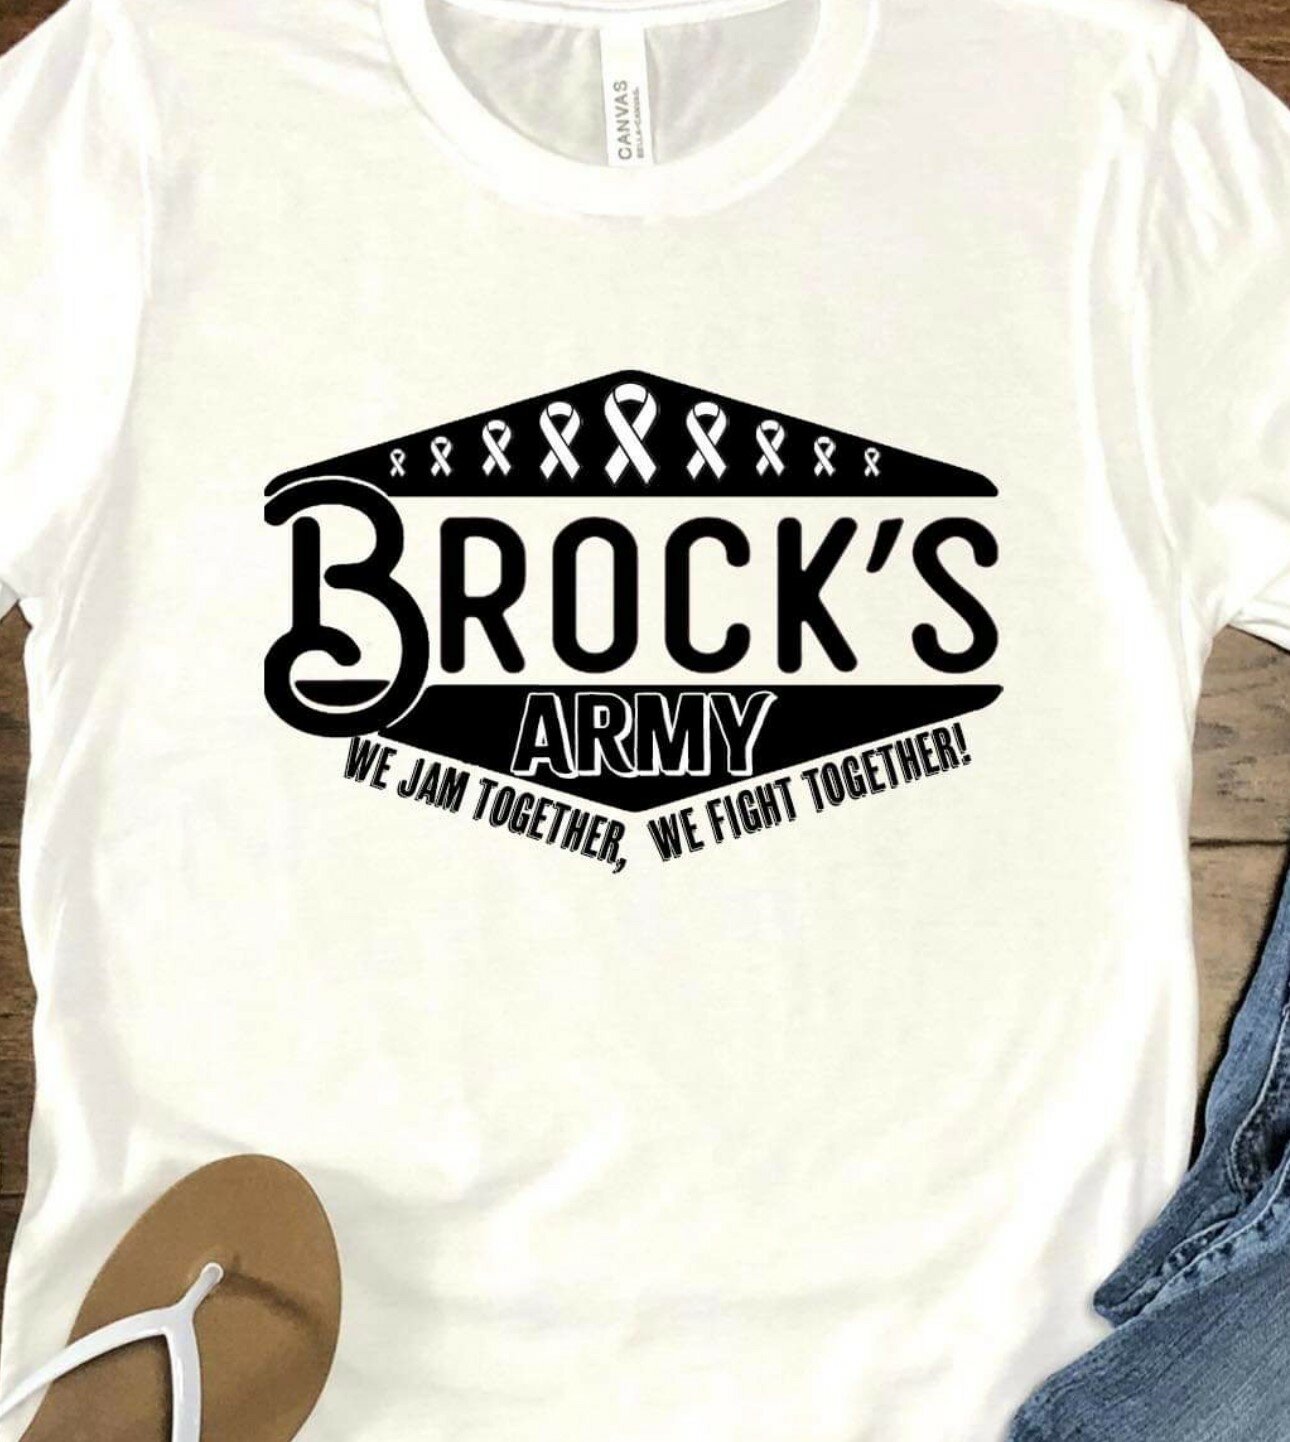 To assist with the costs associated with the cancer treatment, a fundraiser for Brock will take place at Brock’s Food and Drinks, located at 4021 Acton Hwy., at 2 p.m. on Sunday, Dec. 3. Attendees can also purchase a T-shirt in Brock's honor, with 100 percent of the proceeds benefiting Brock's cancer treatment.